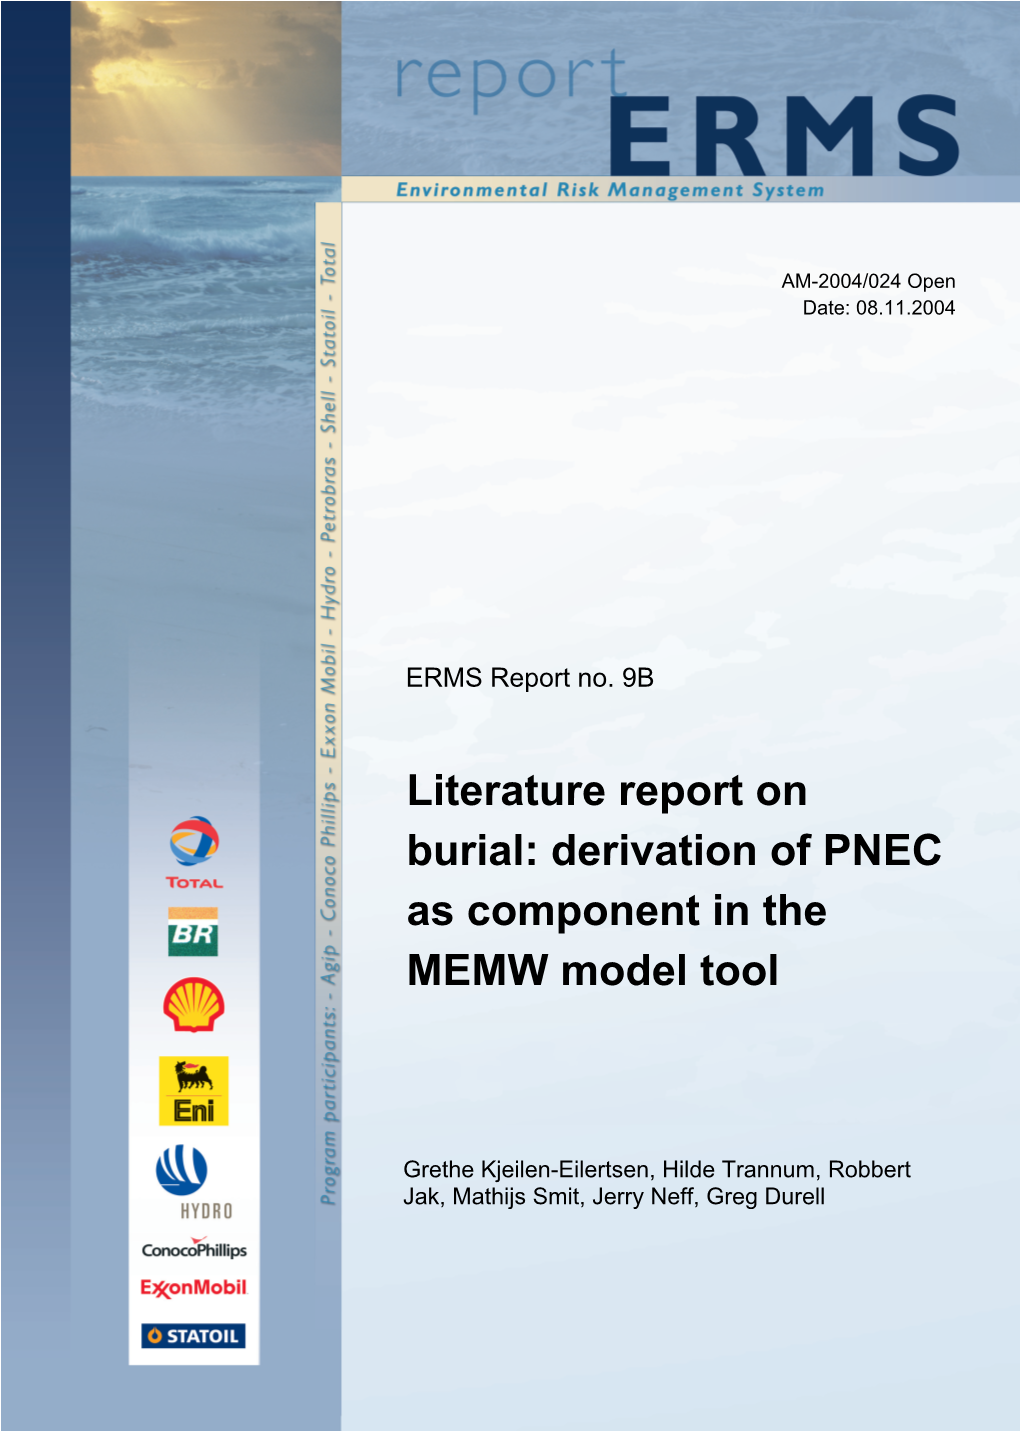 Literature Report on Burial: Derivation of PNEC As Component in the MEMW Model Tool